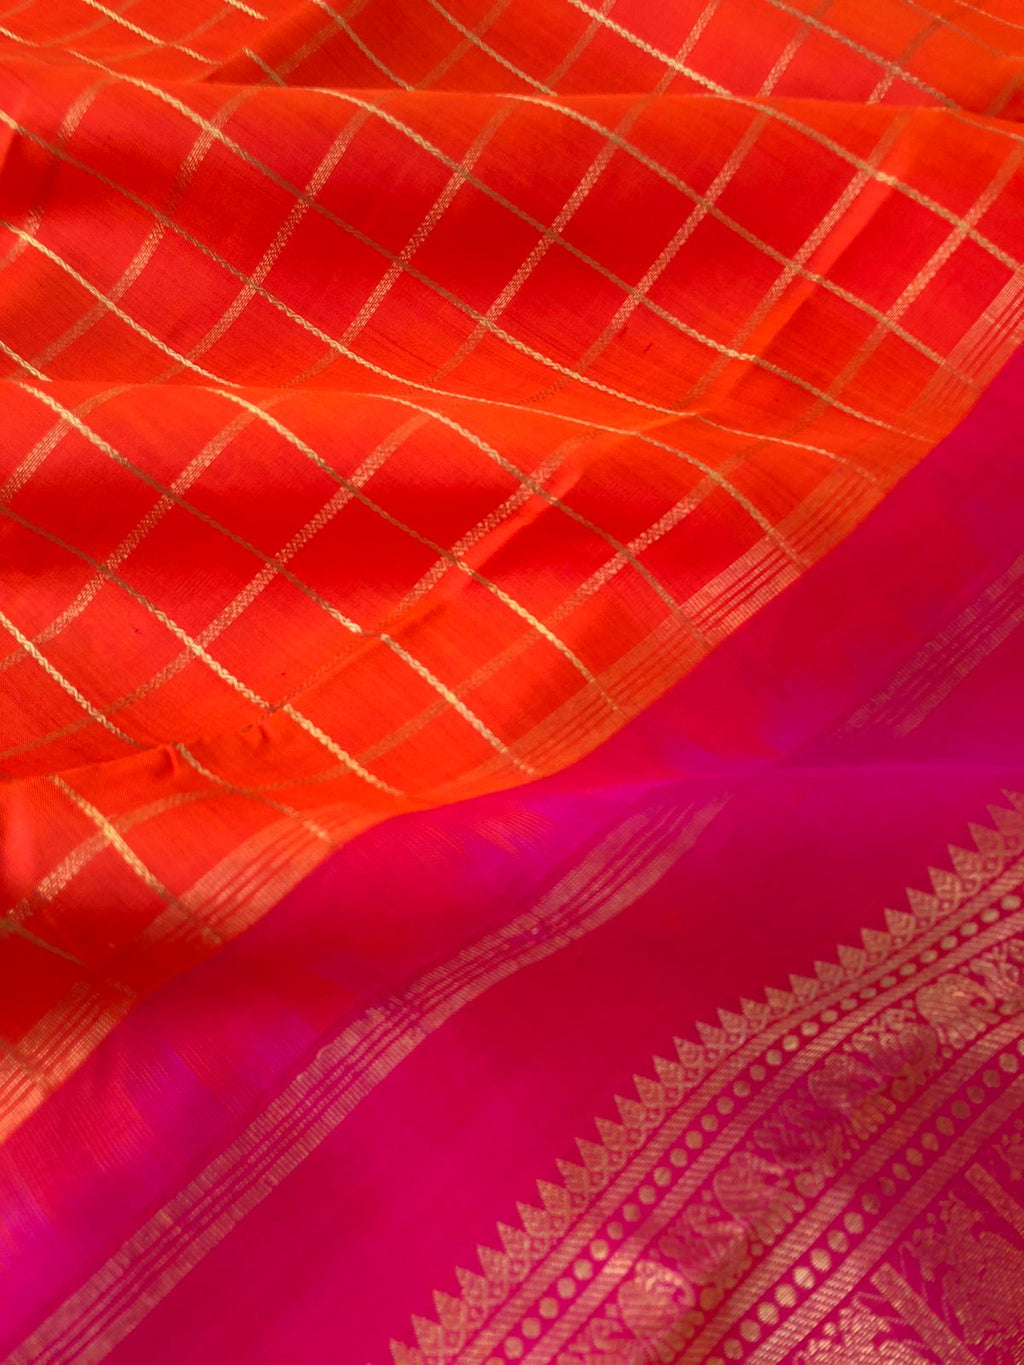 Leela - Limited Edition of Kanchivarams - at the most beautiful traditional solid orange and pink veldhari chex woven body with detailed intricate woven pallu